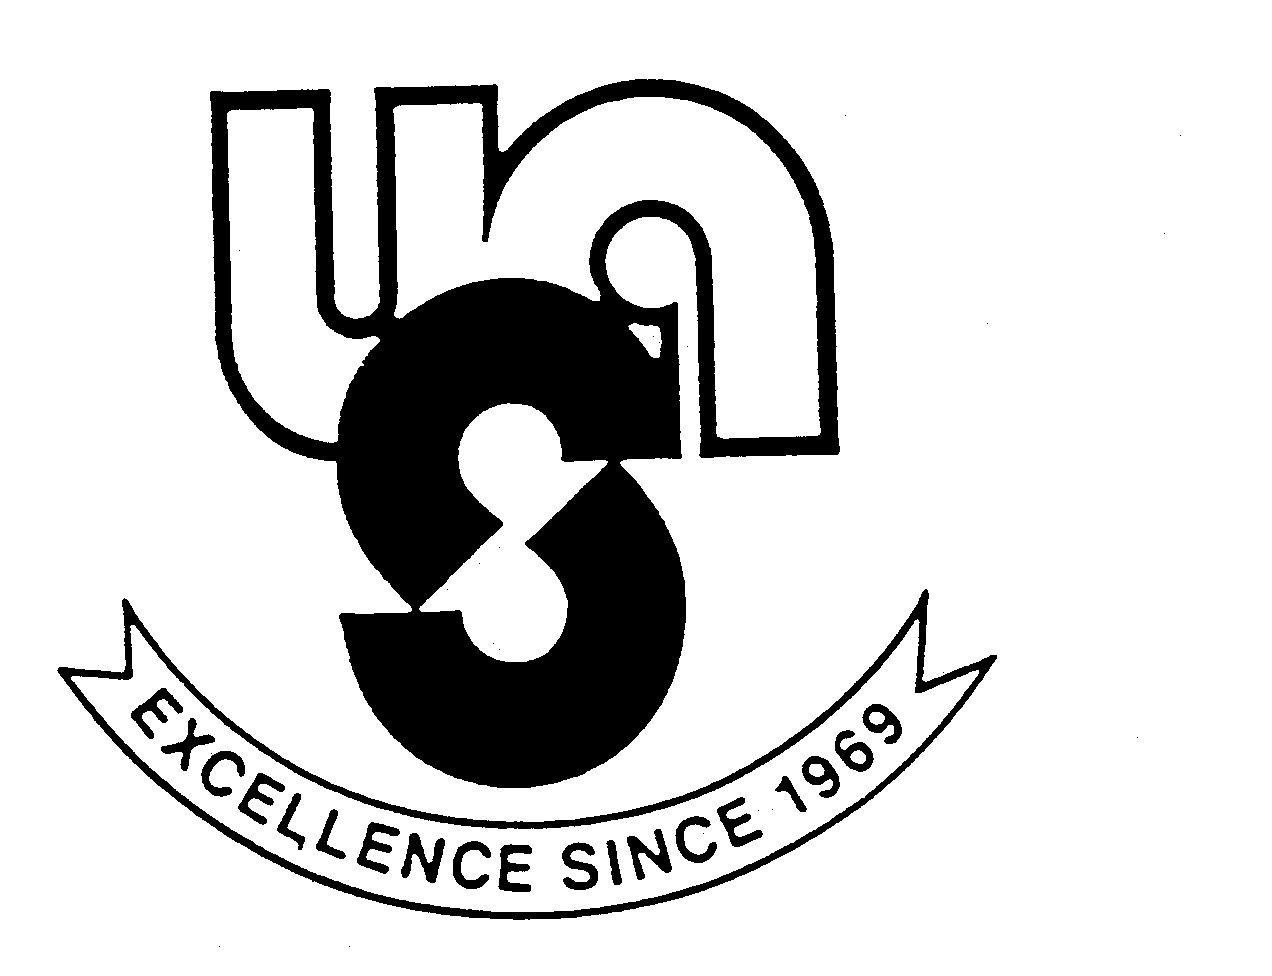  UAS EXCELLENCE SINCE 1969